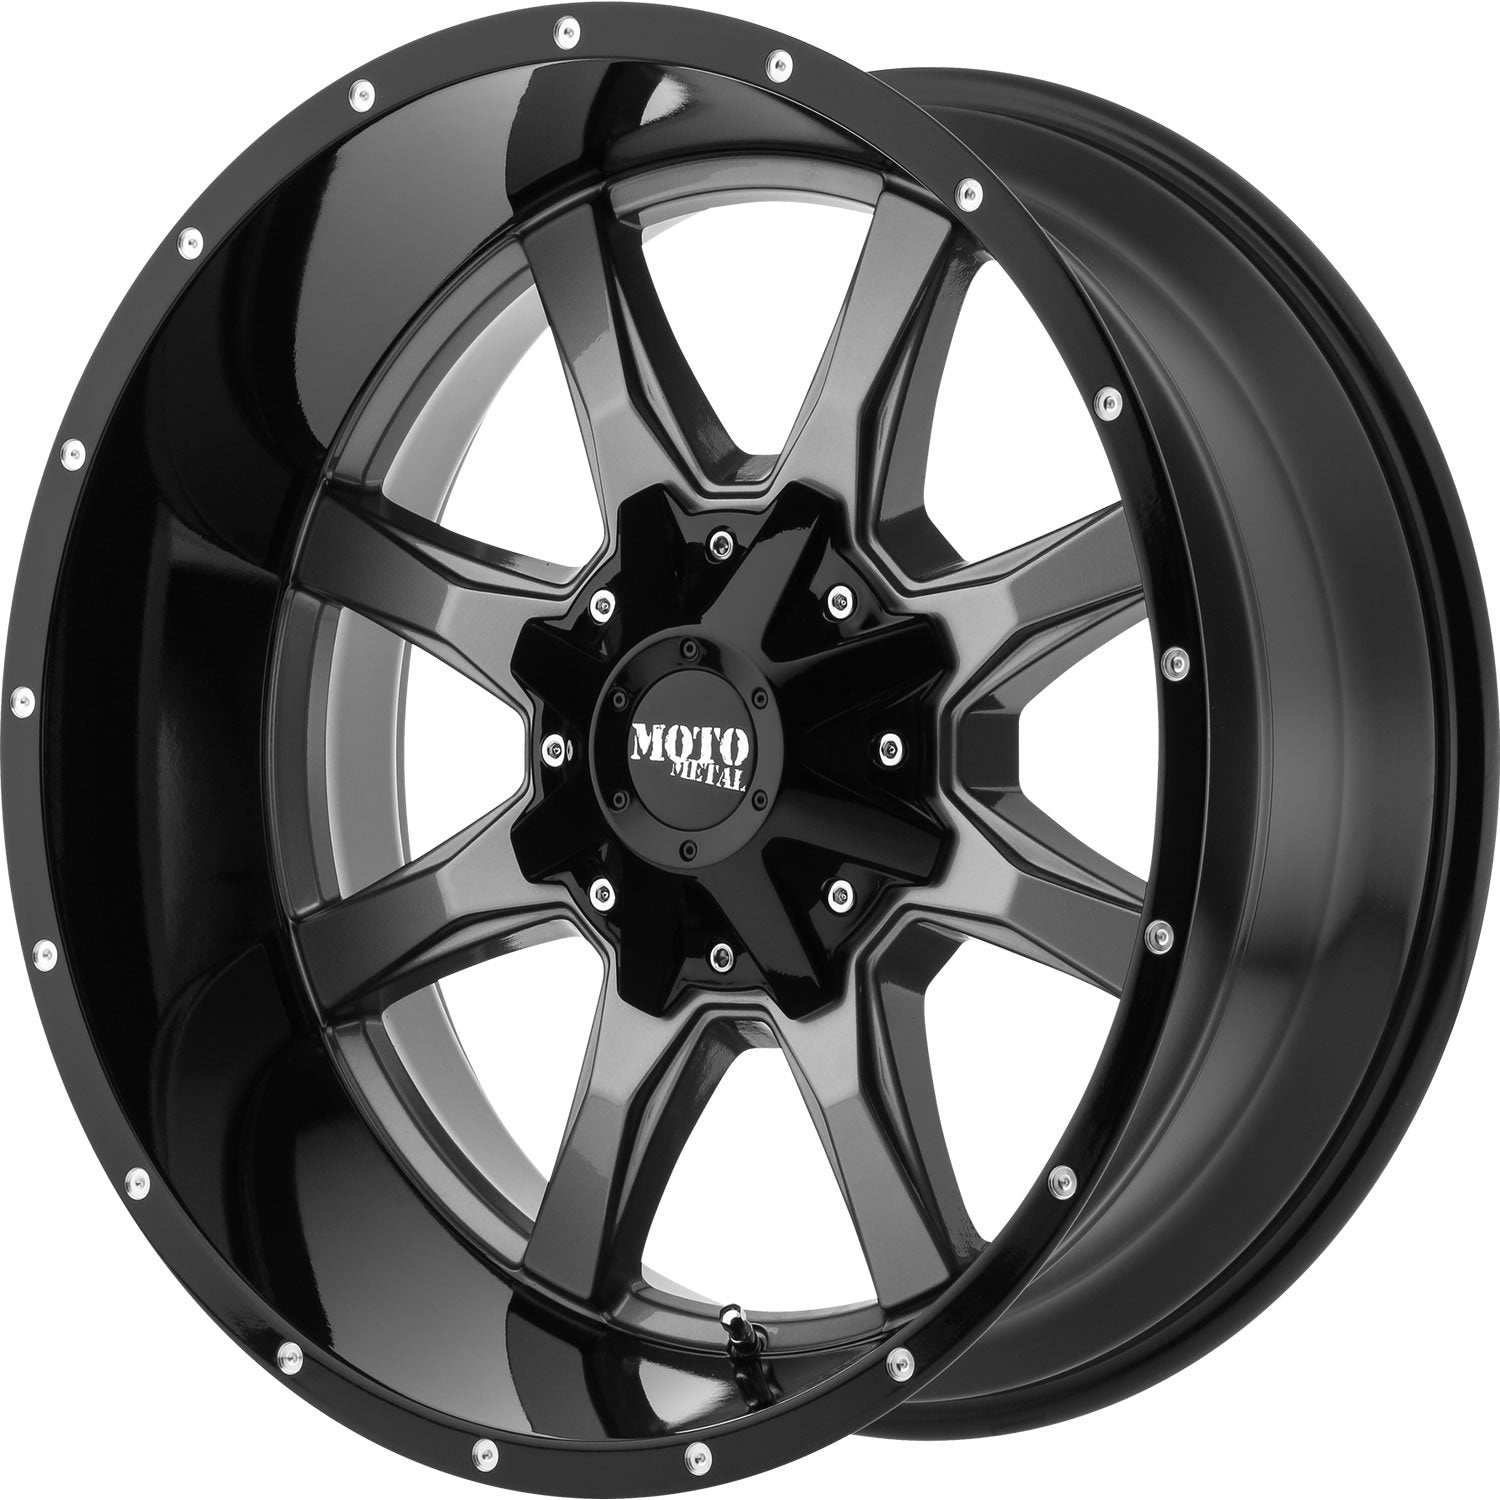 Moto Metal MO970 20x9 0 6x135/6x139.7 (6x5.5) Gray and Black - Tires and Engine Performance